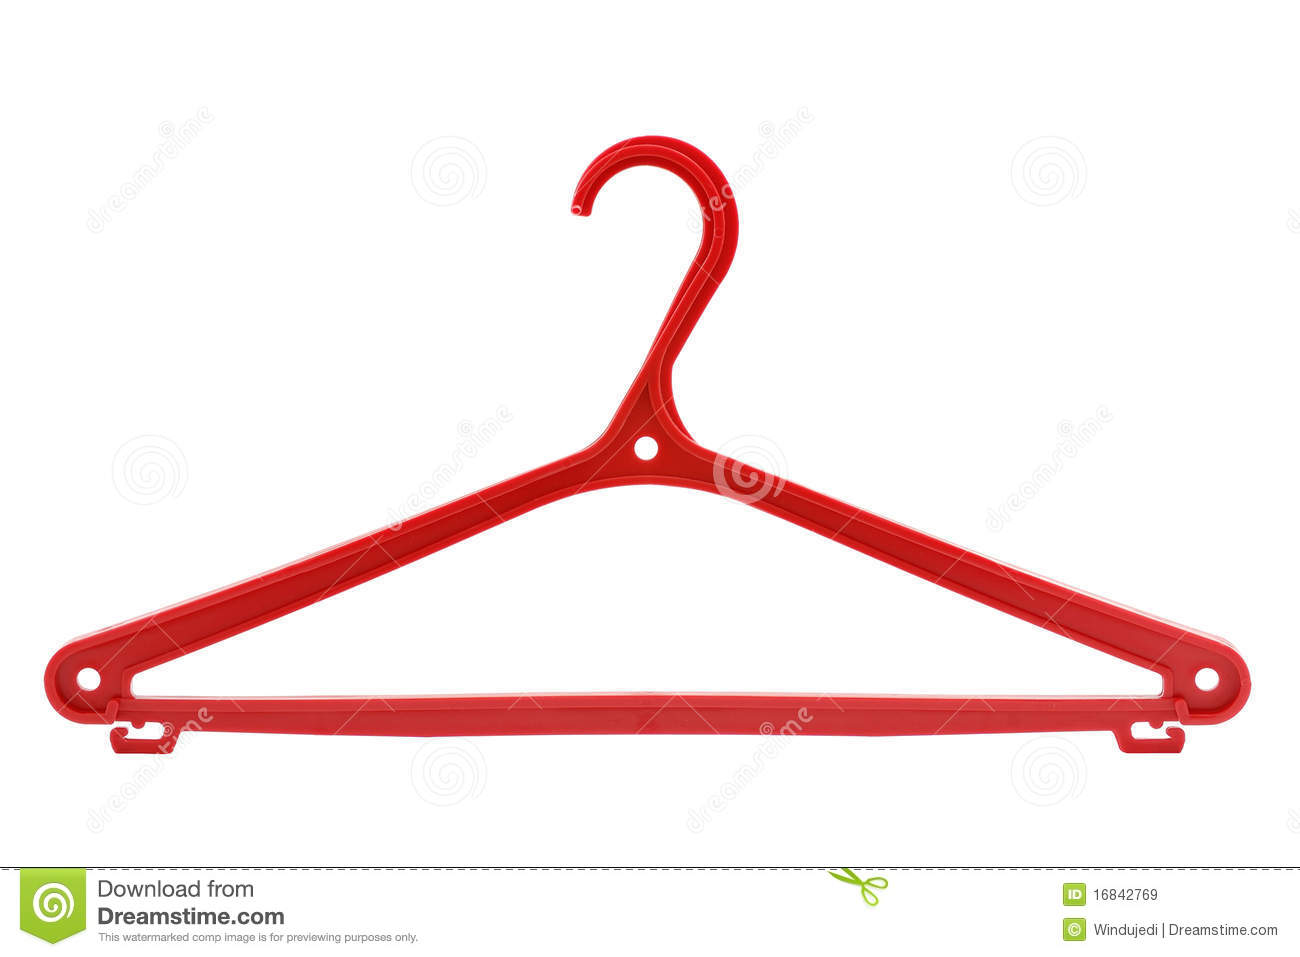 Plastic Hanger Royalty Free Stock Images   Image  16842769